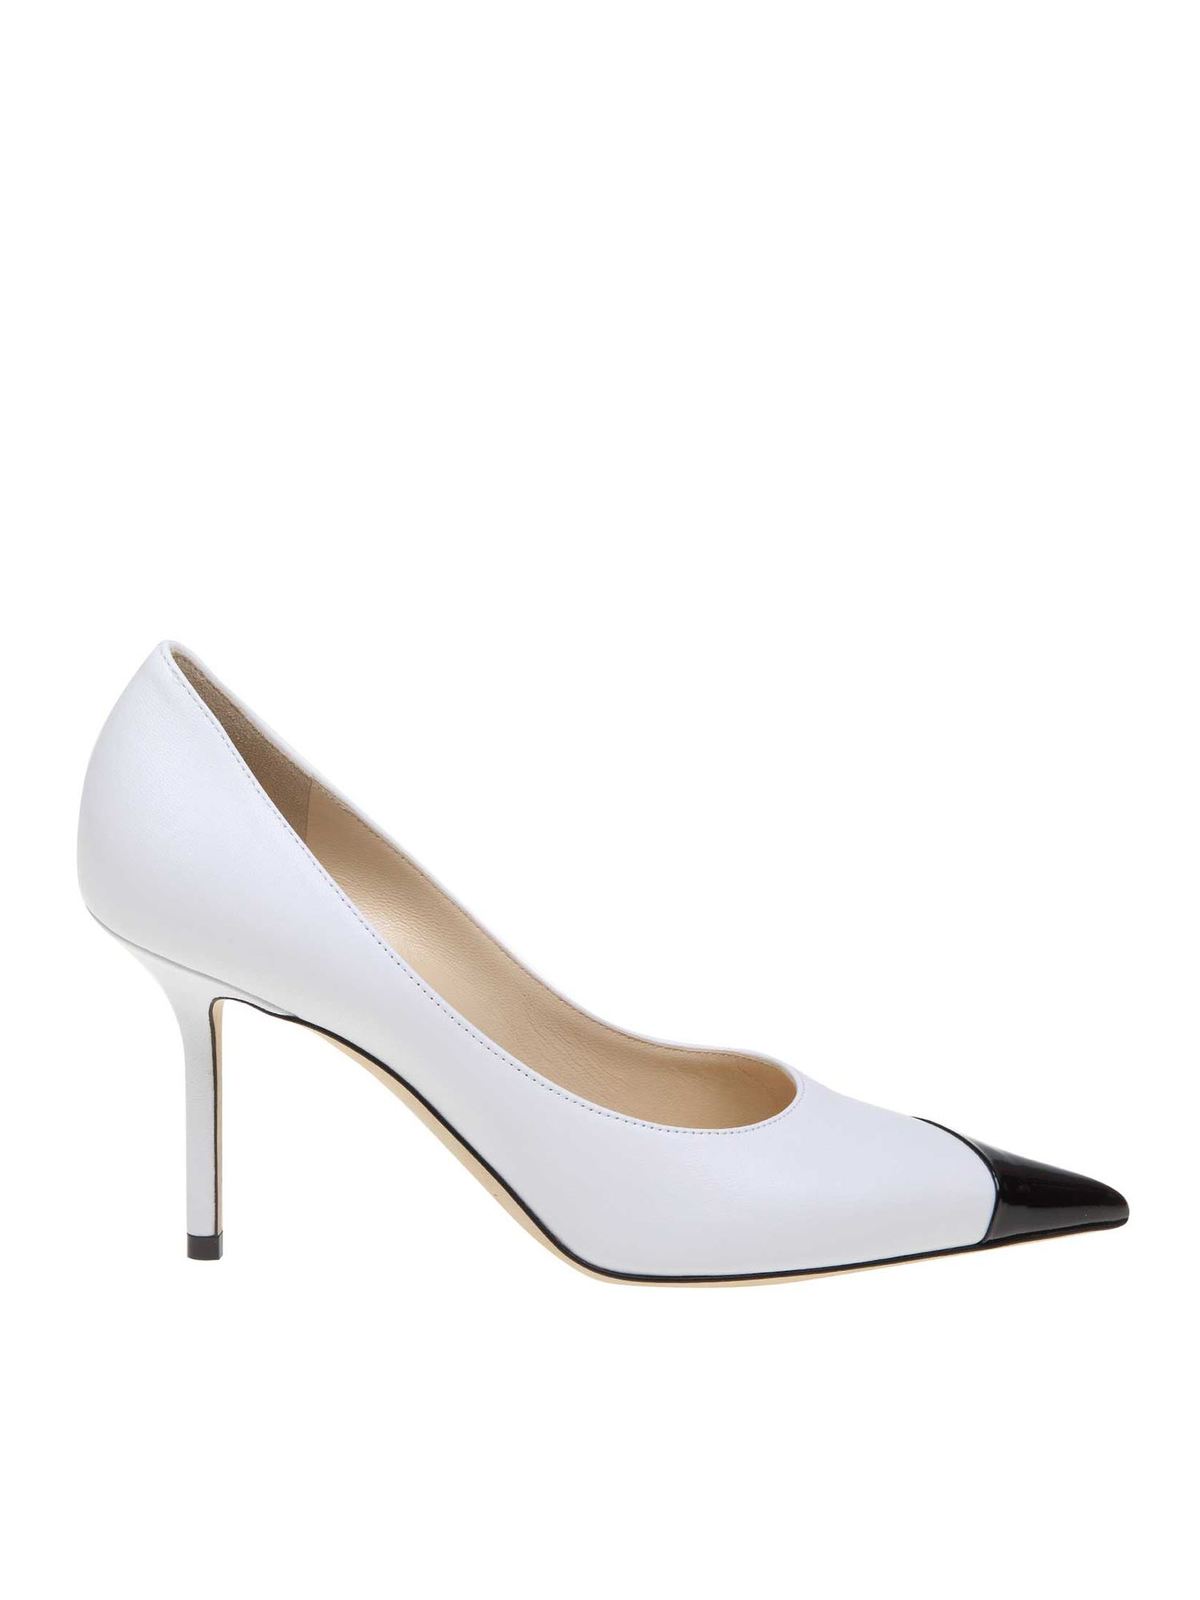 hende Estate straf Court shoes Jimmy Choo - Love 85 pumps in white and black leather -  LOVE85ZYZBLACK&WHITE